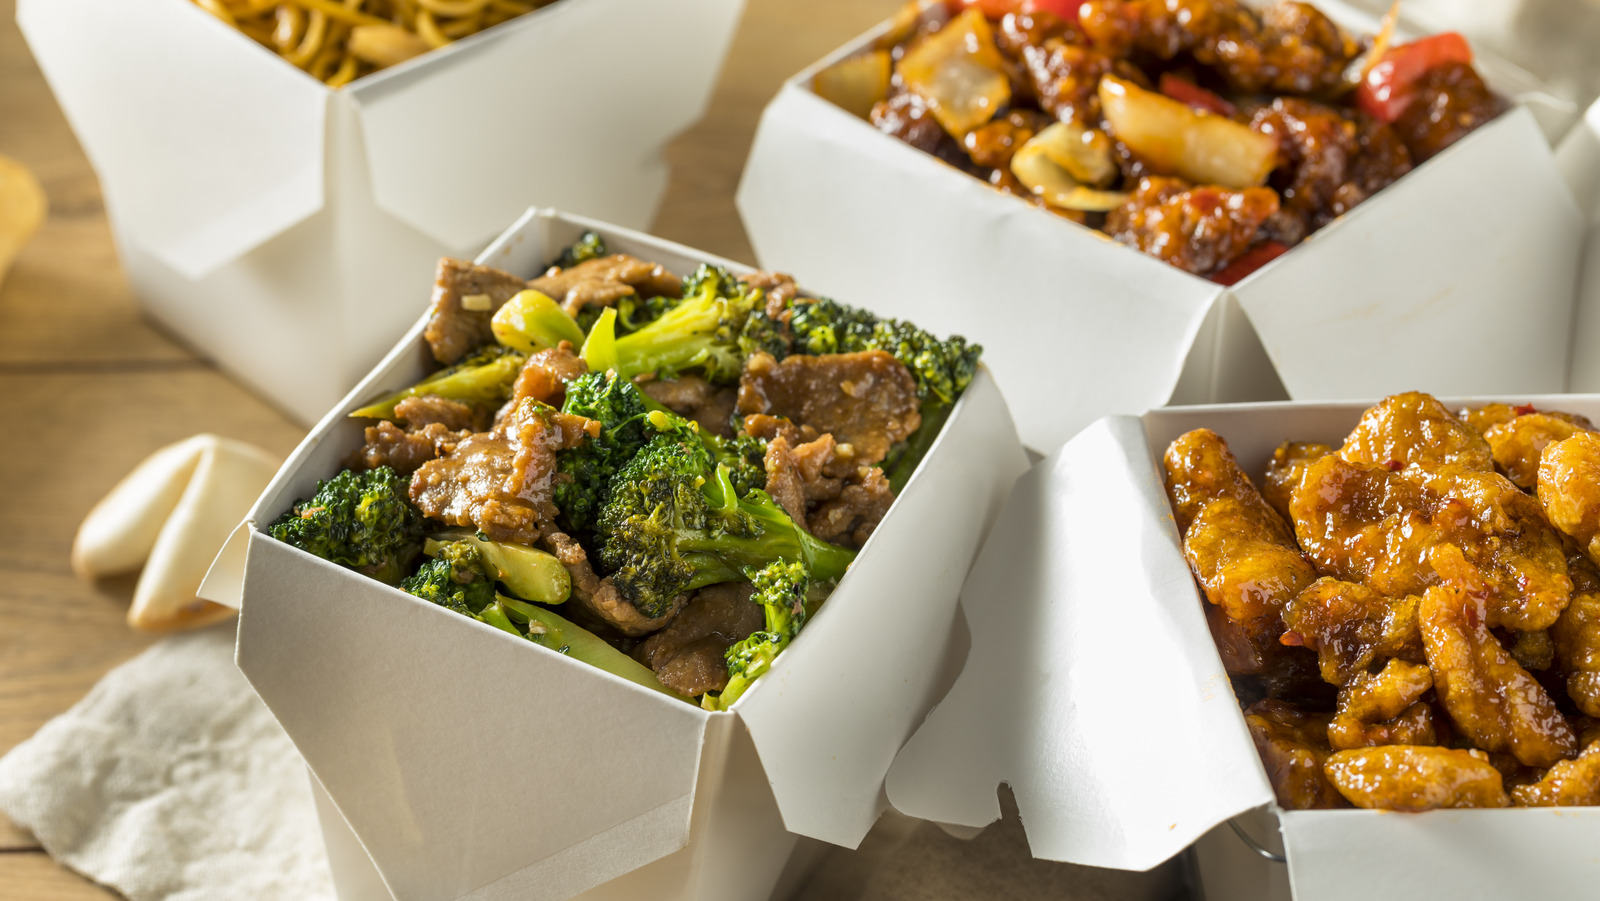 https://www.tastingtable.com/img/gallery/16-best-restaurants-for-chinese-takeout-in-nyc/l-intro-1682701654.jpg